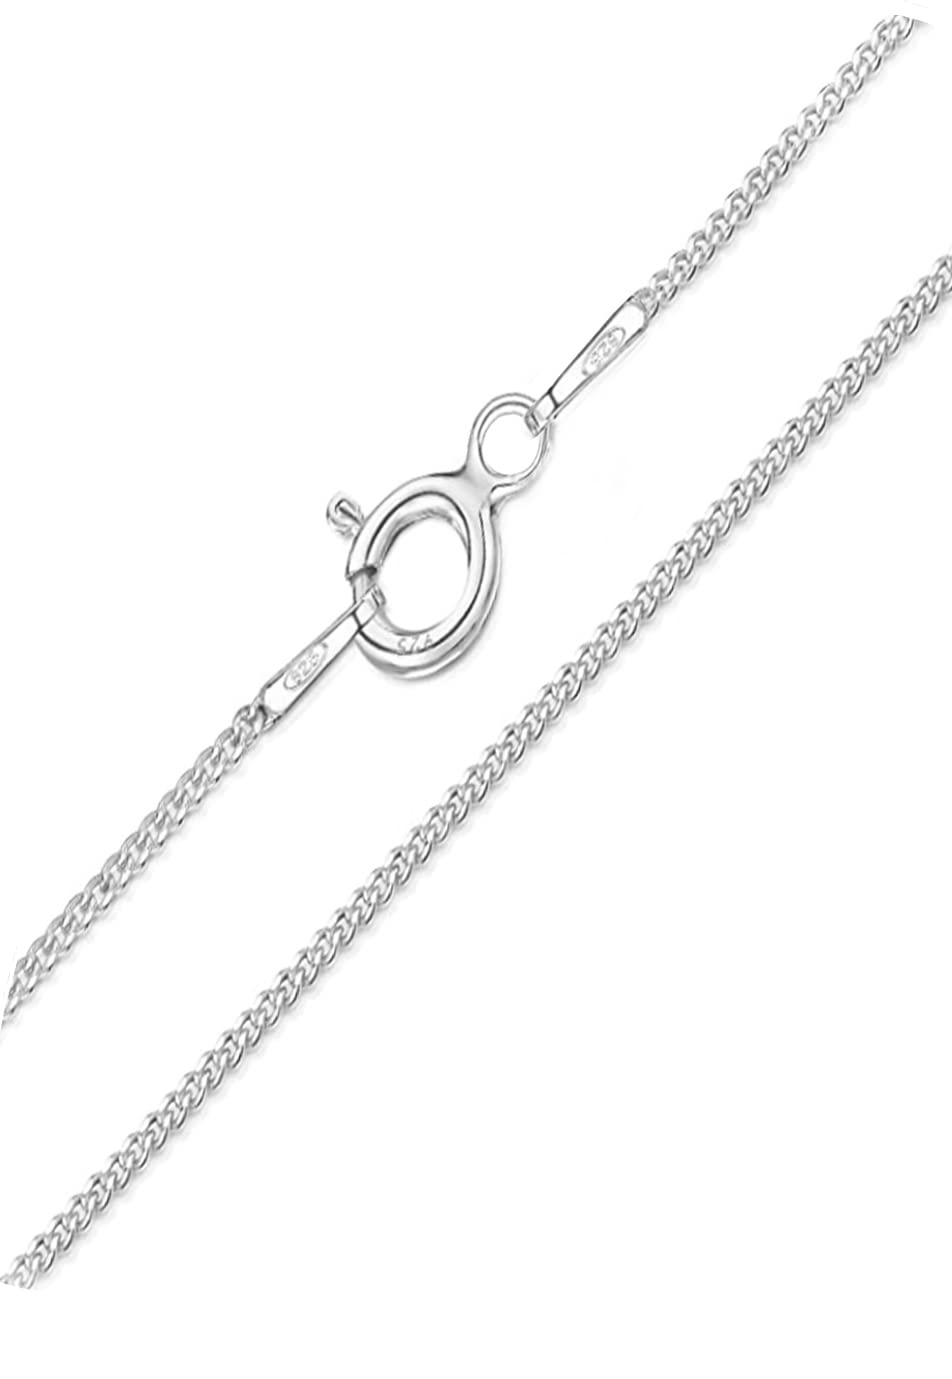 35cm - 14 inch Sterling Silver curb chain for children 1.2mm - short for children only. Gift boxed. 8500/14/2